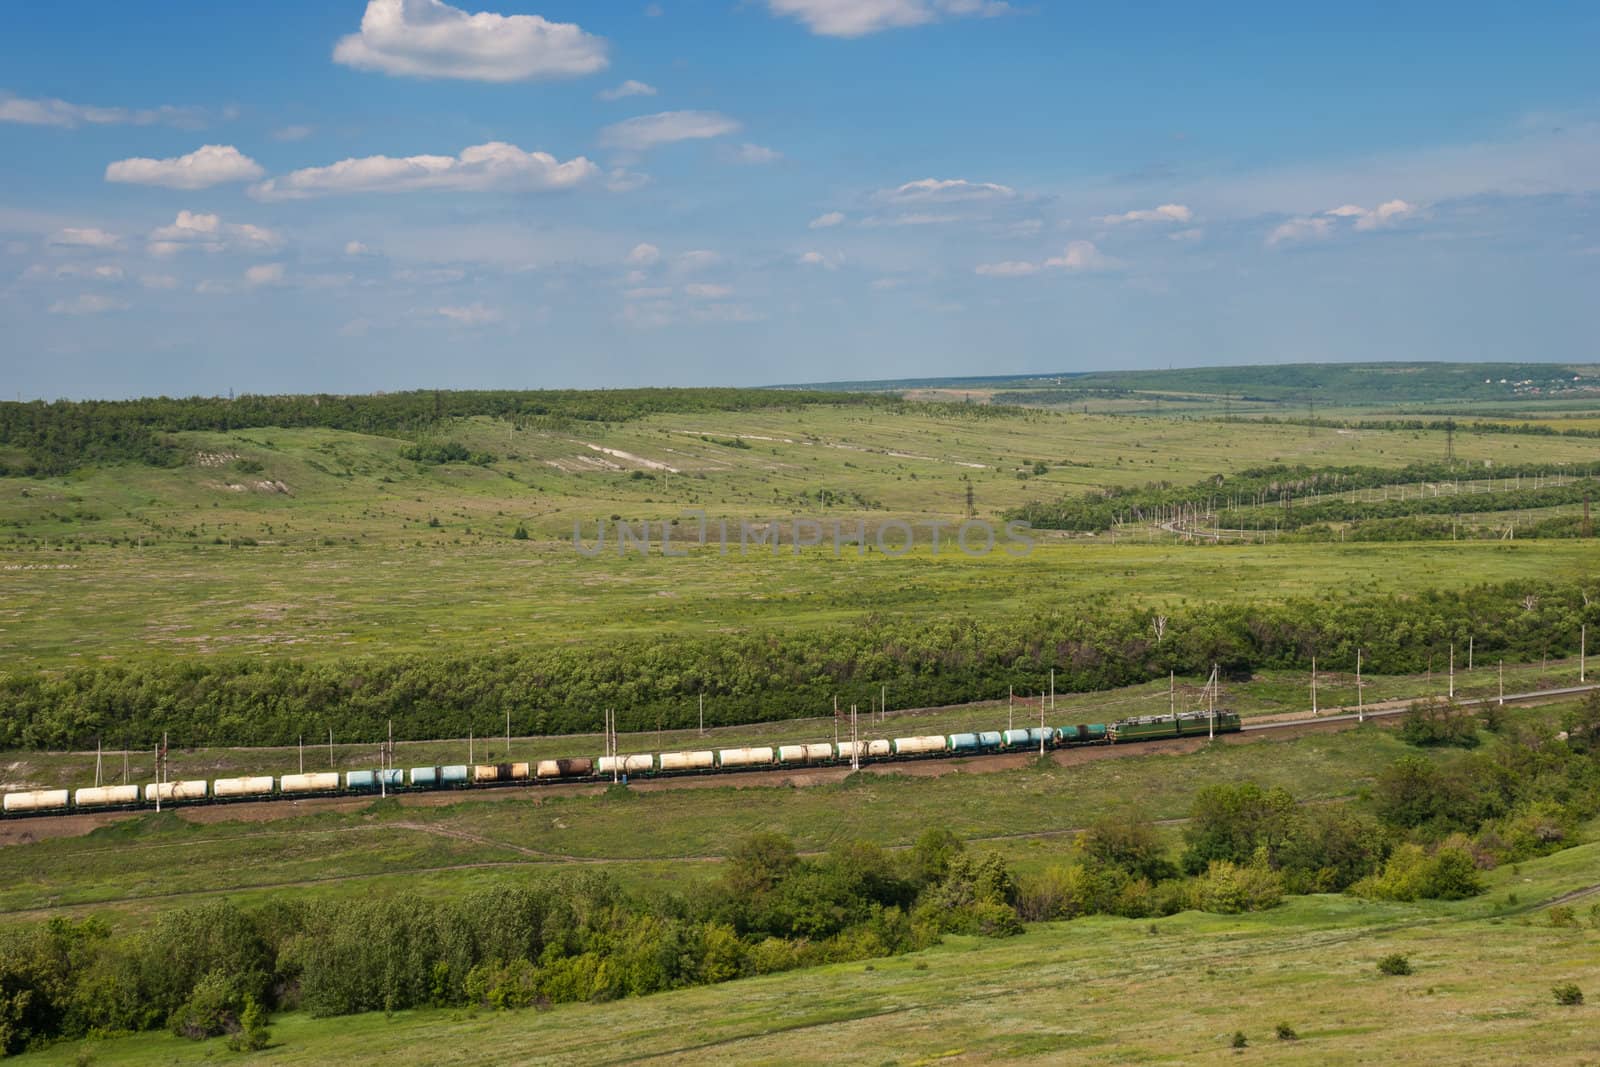 Freight Train Going by Railway Against Summer Landscape